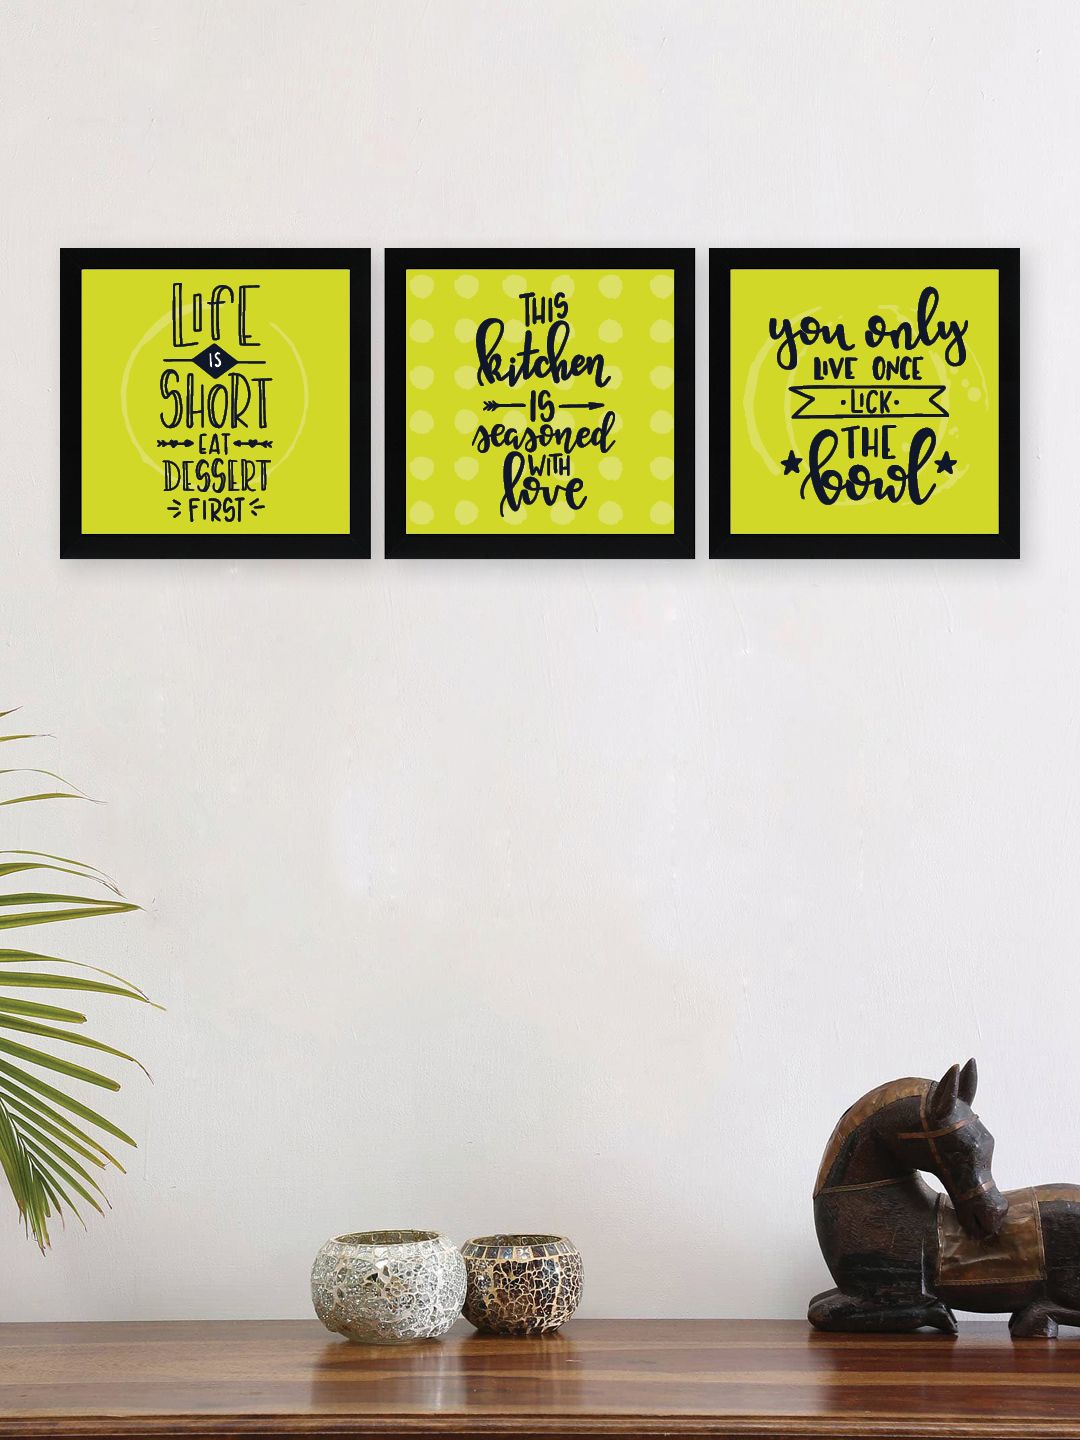 nest ART Set Of 3 Yellow & Black Printed Wall Hanging Without Glass Framed Posters Price in India